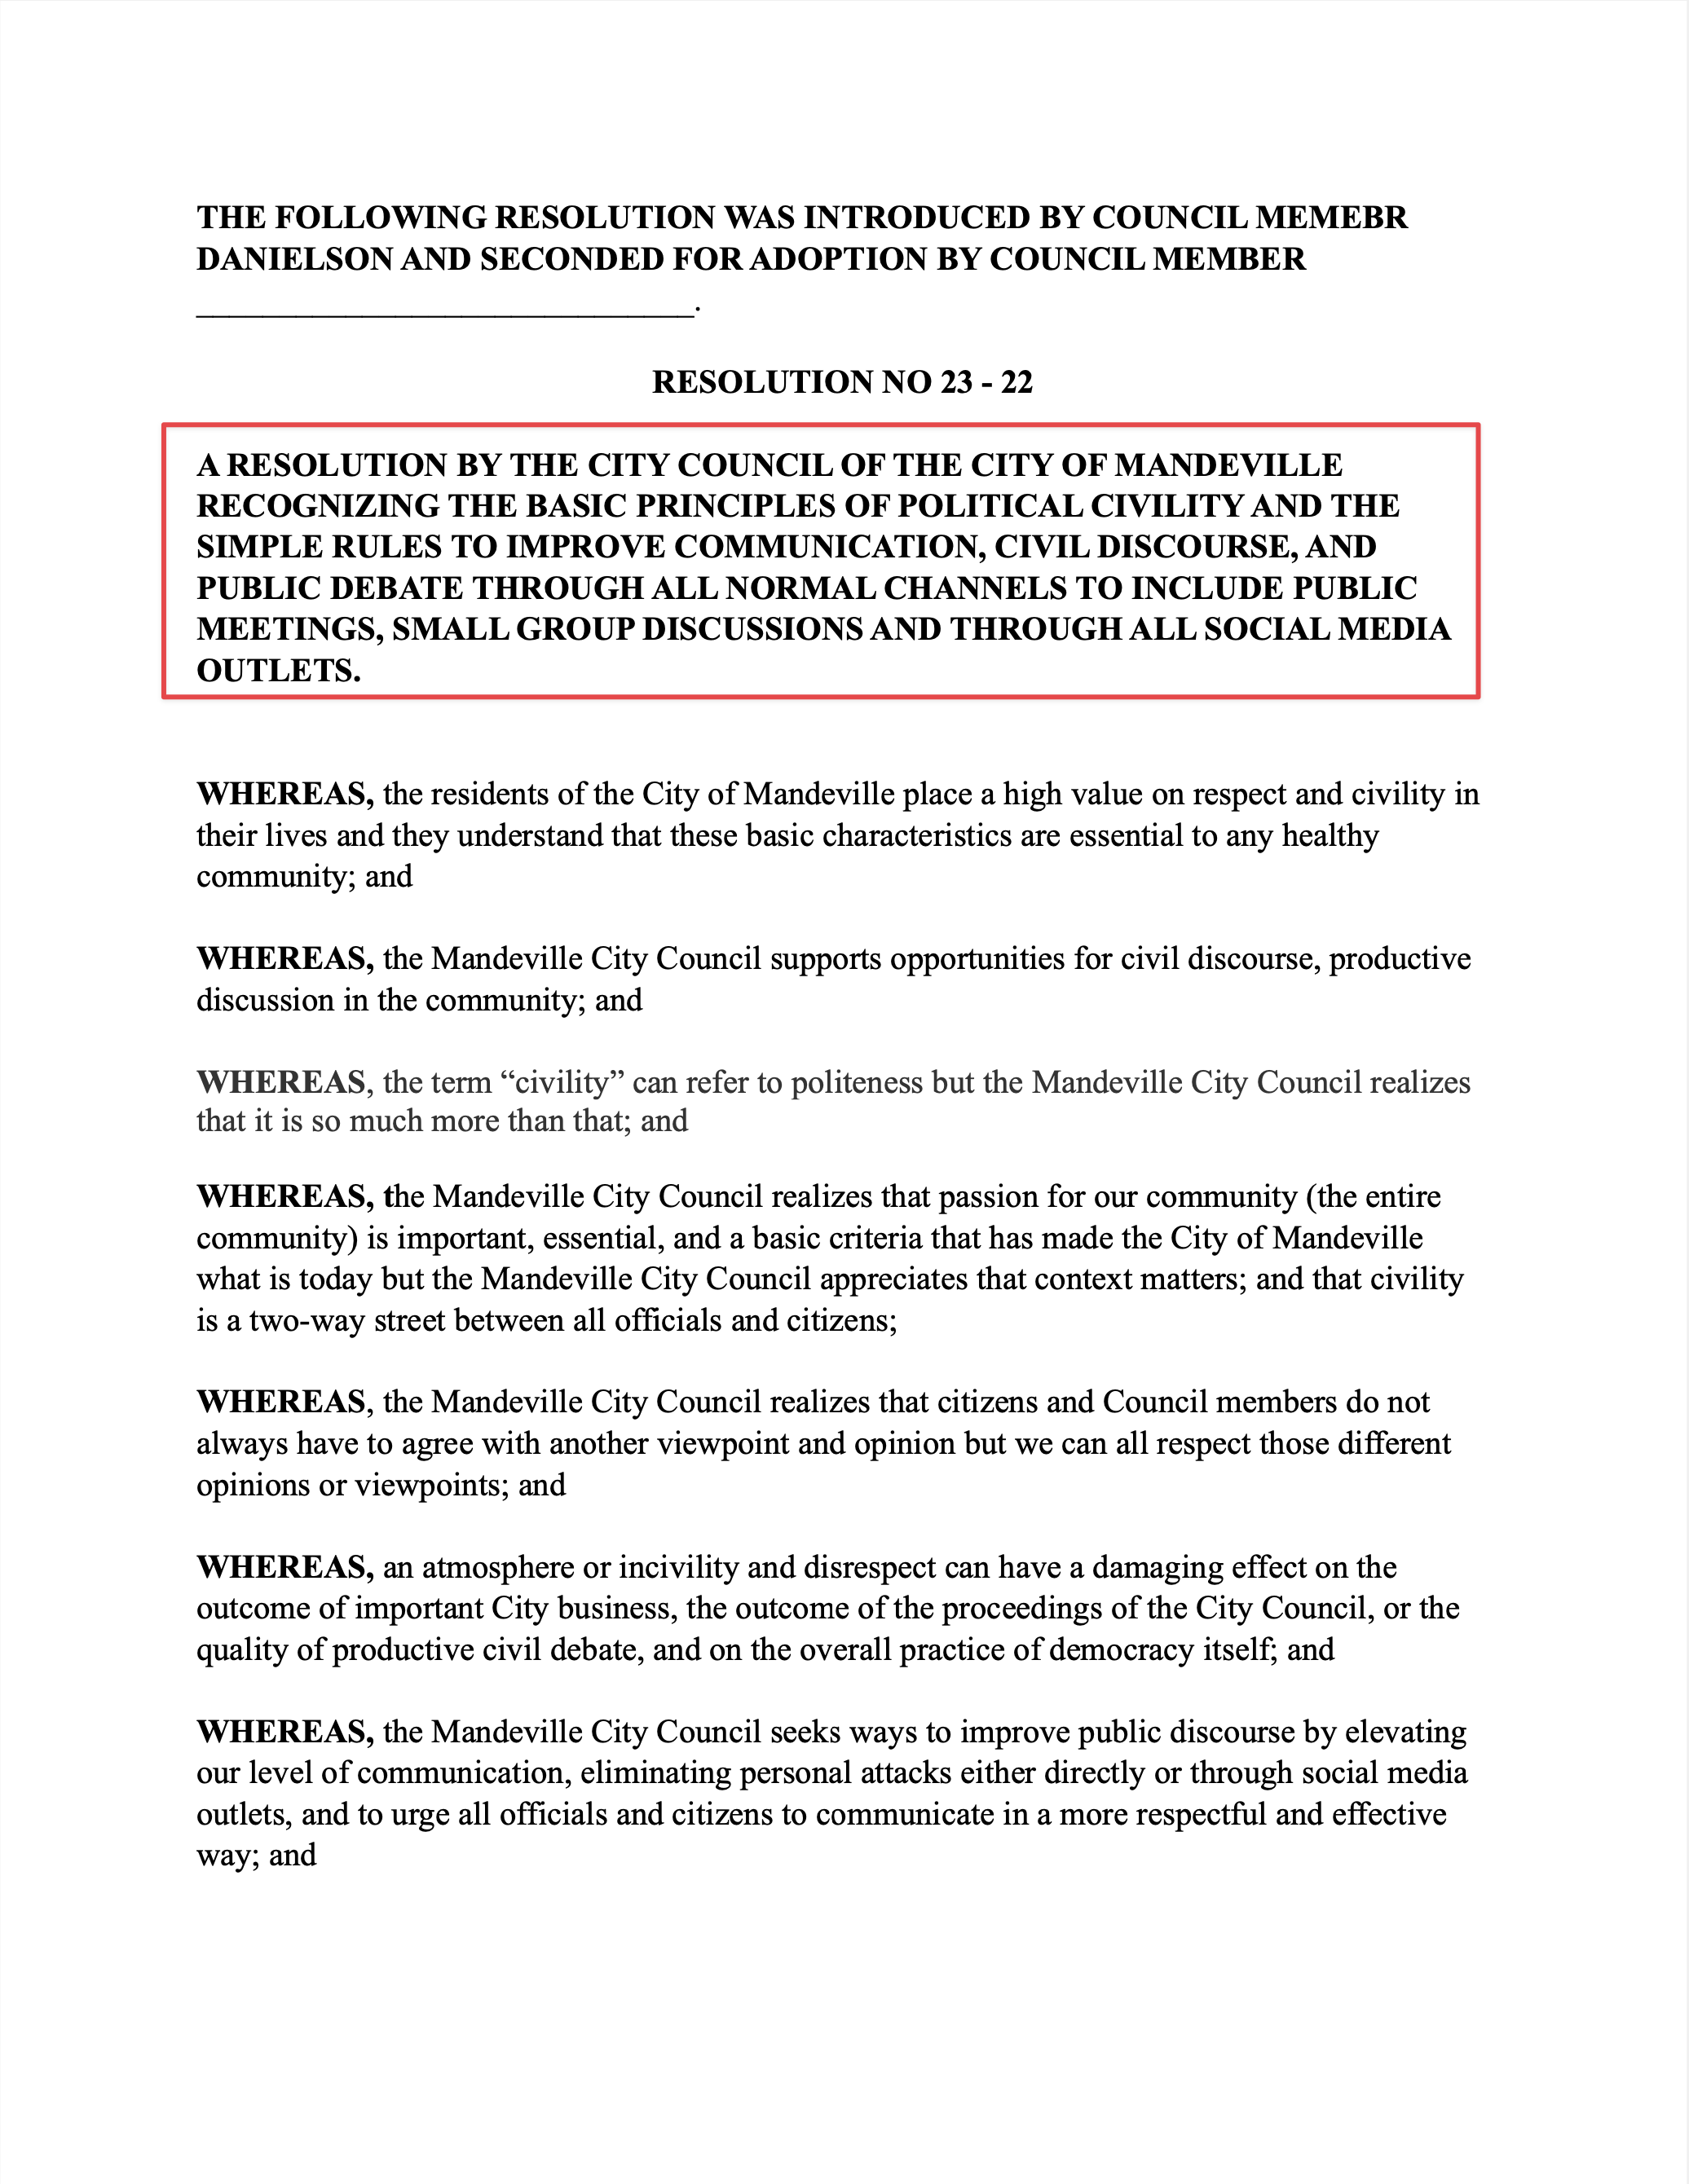 Proposed Resolution 23-22, page 1 (Mandeville Daily/William Kropog)